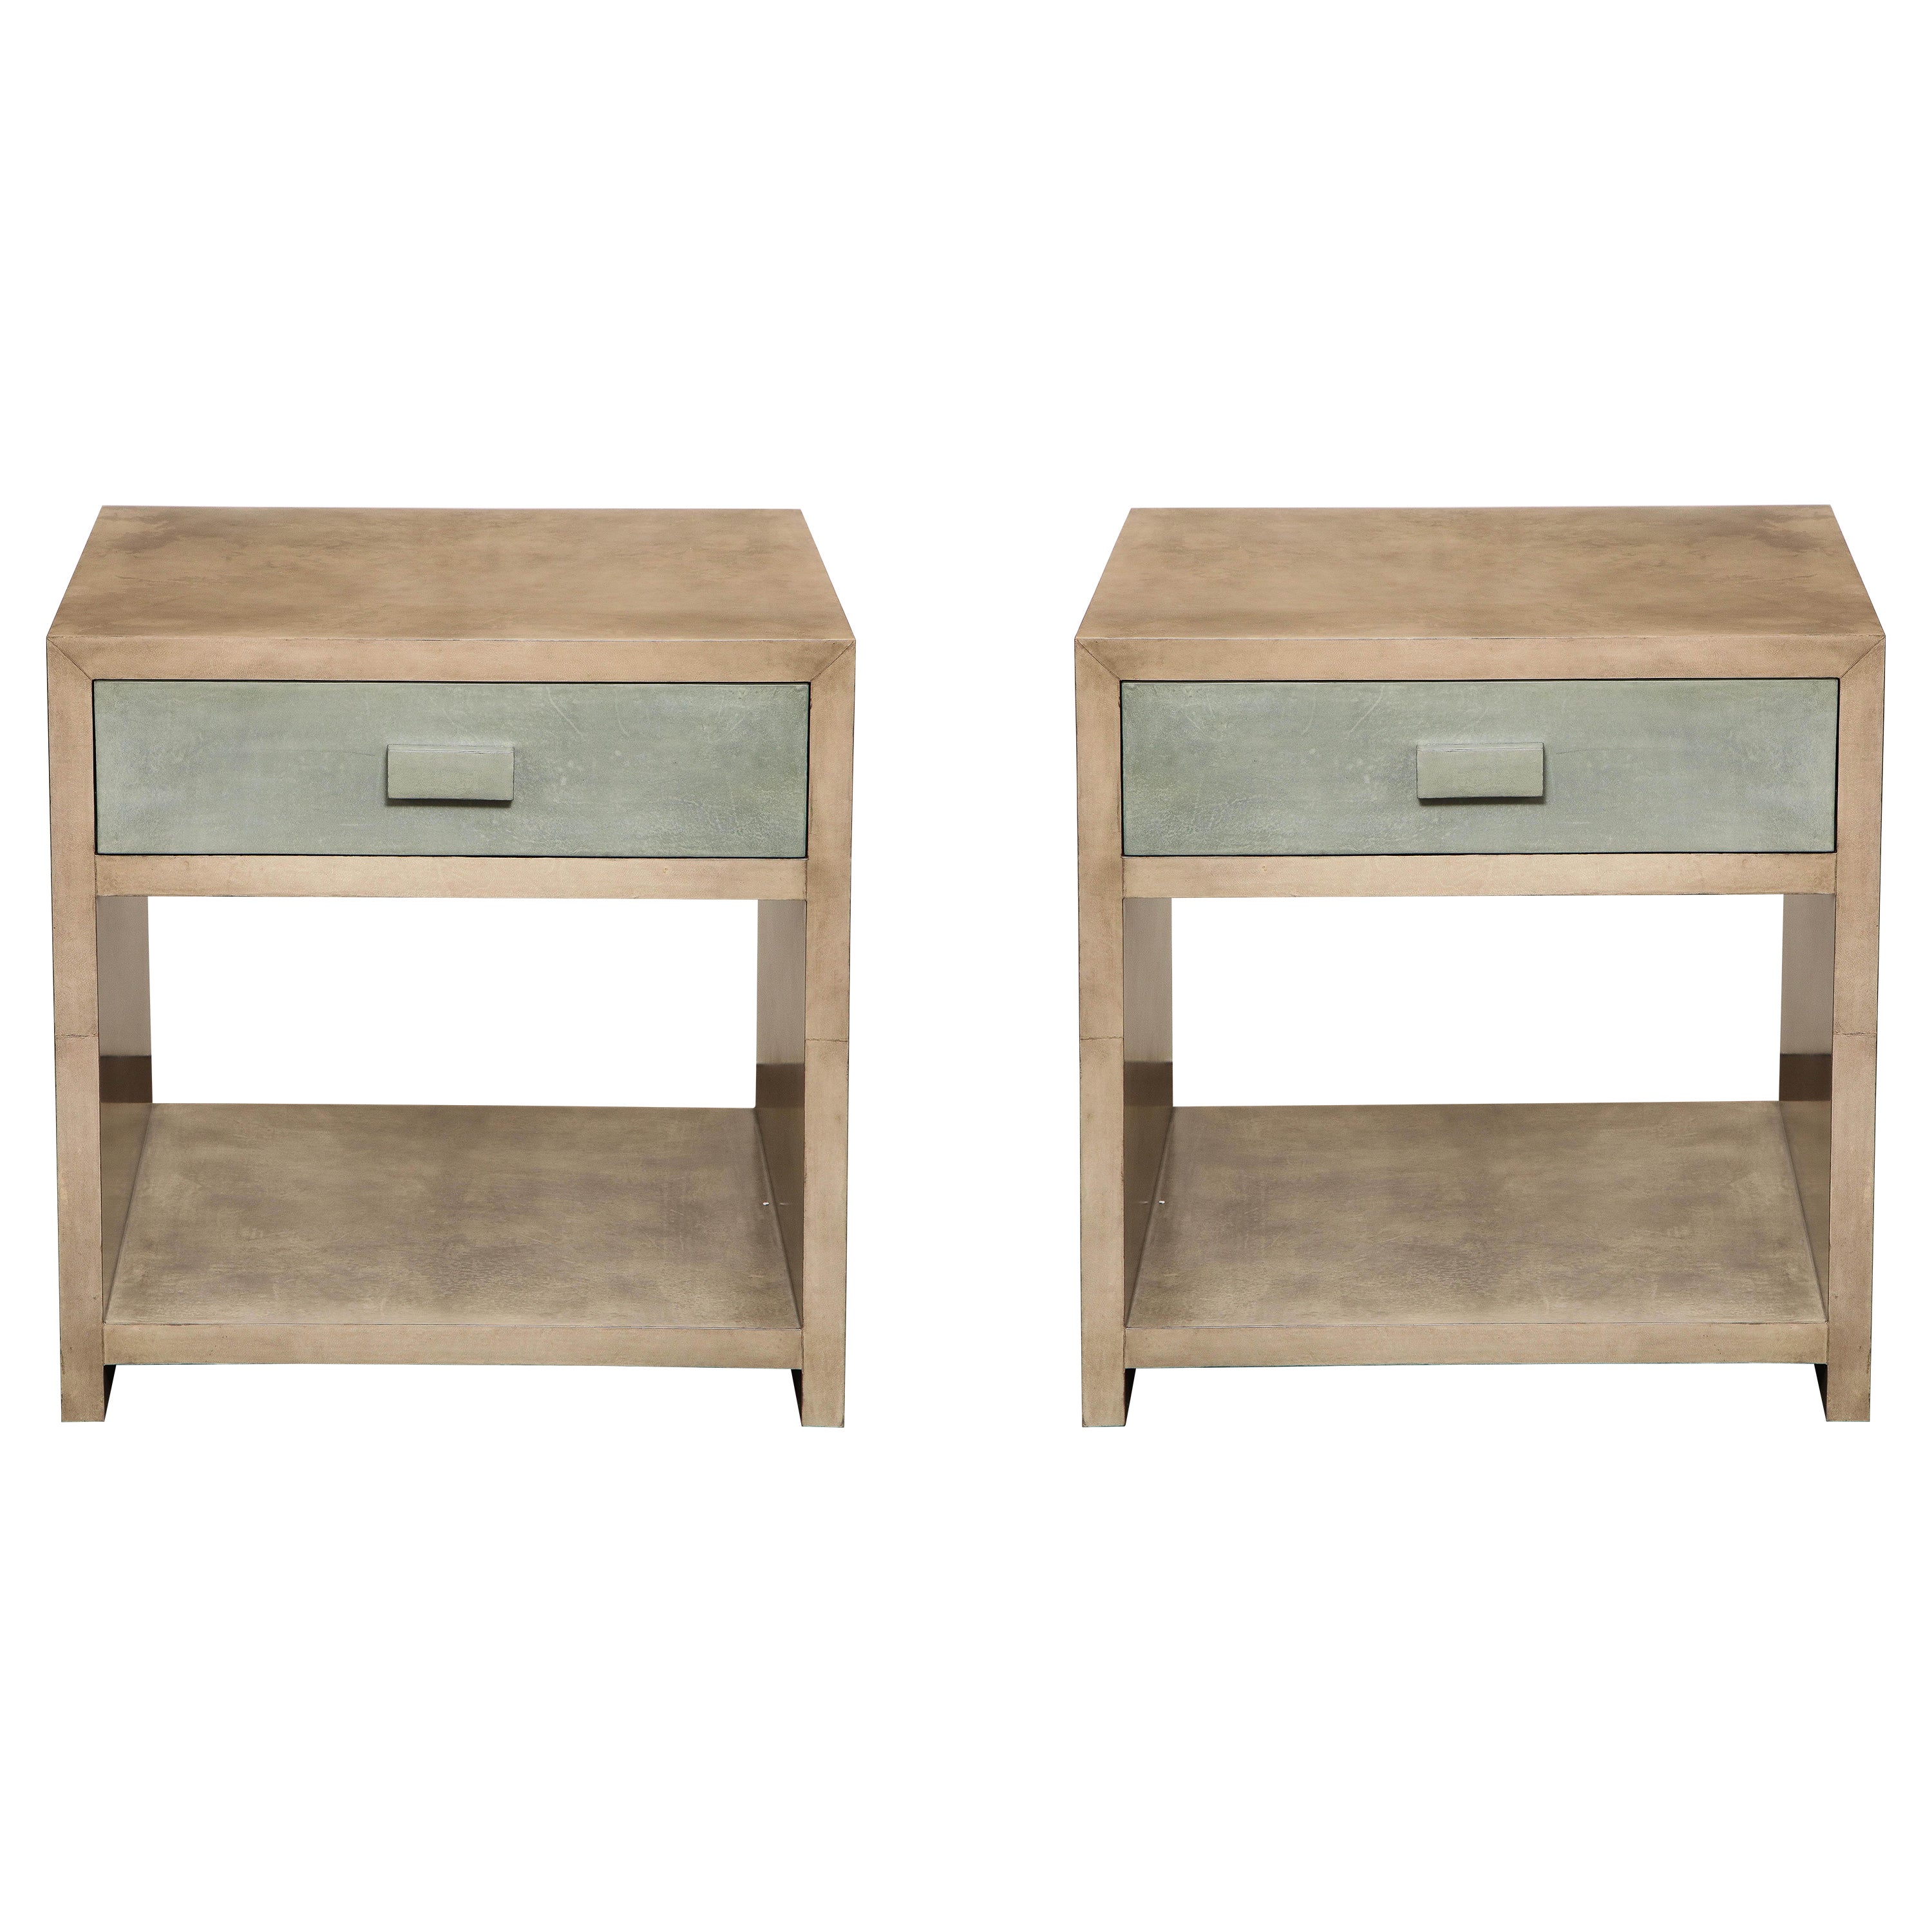 Custom Pair of Two-Tone Parchment Nightstands For Sale